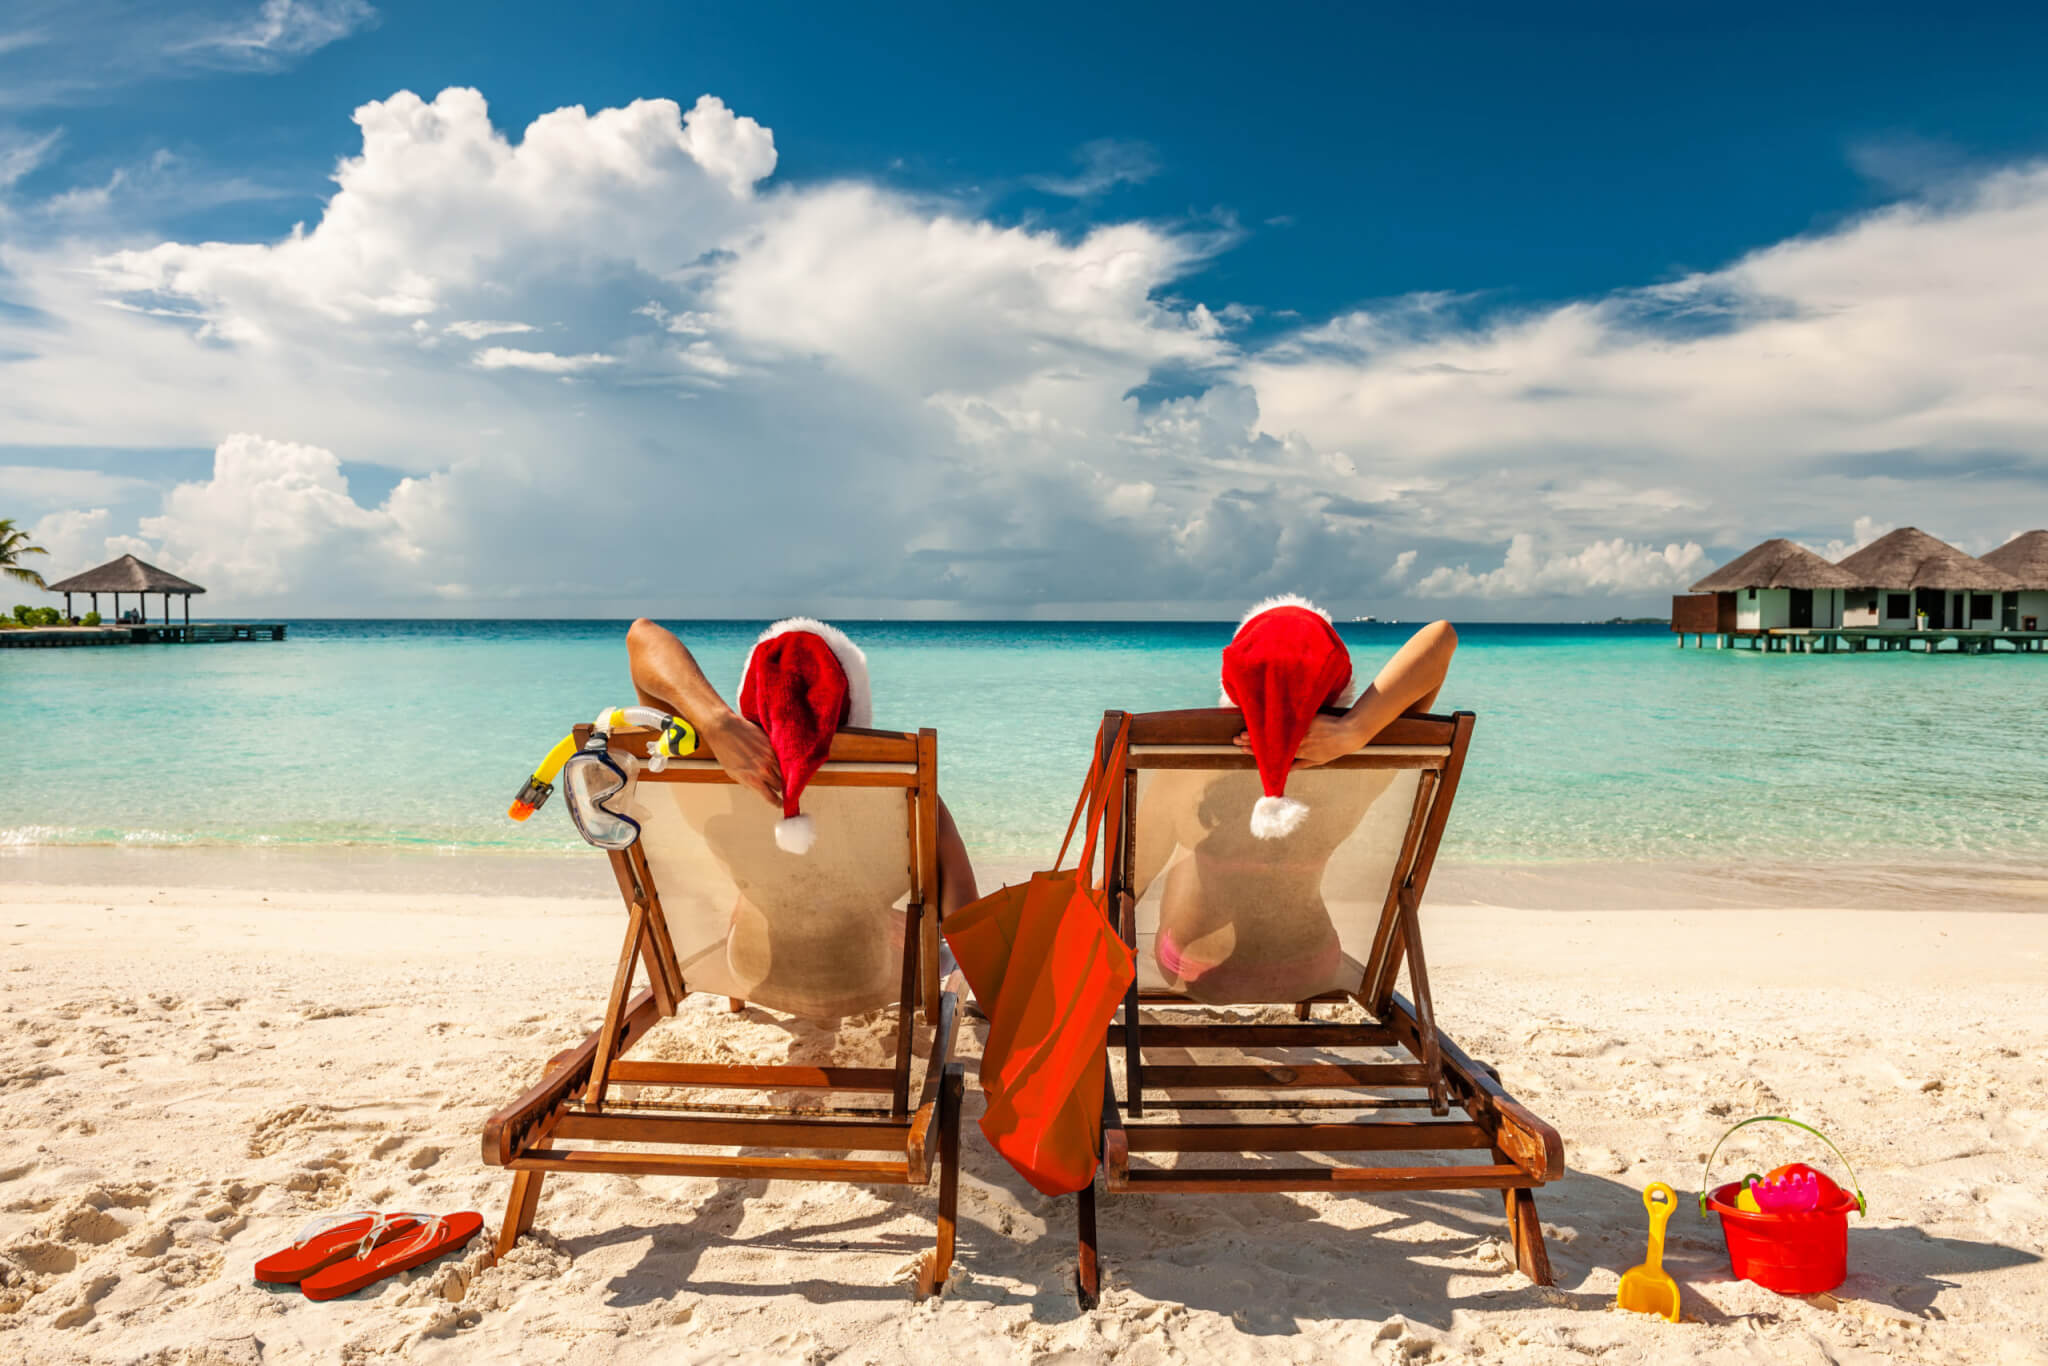 Skip the annual family meal? 3 in 5 would rather take a vacation than deal with holiday stress